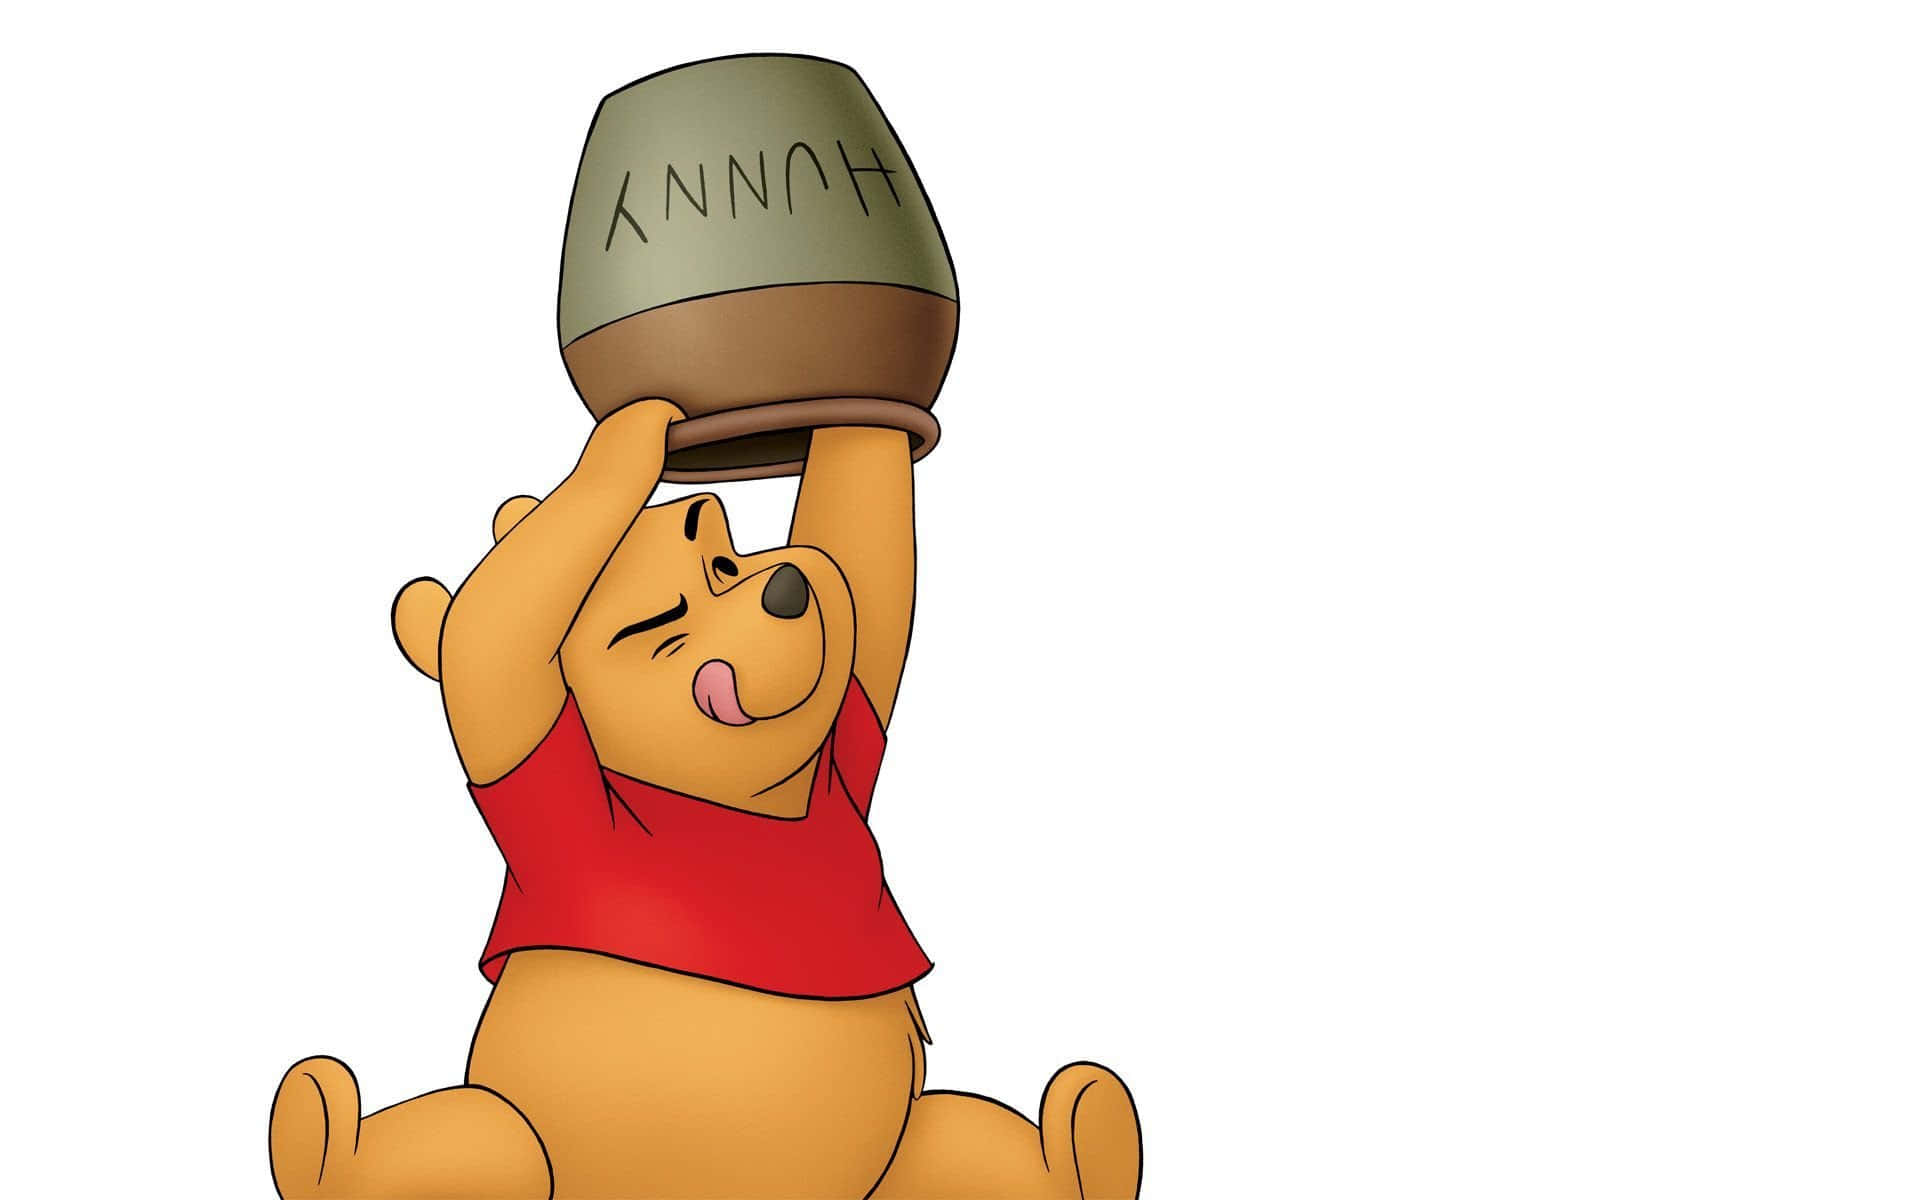 Stay productive with Winnie the Pooh's laptop Wallpaper